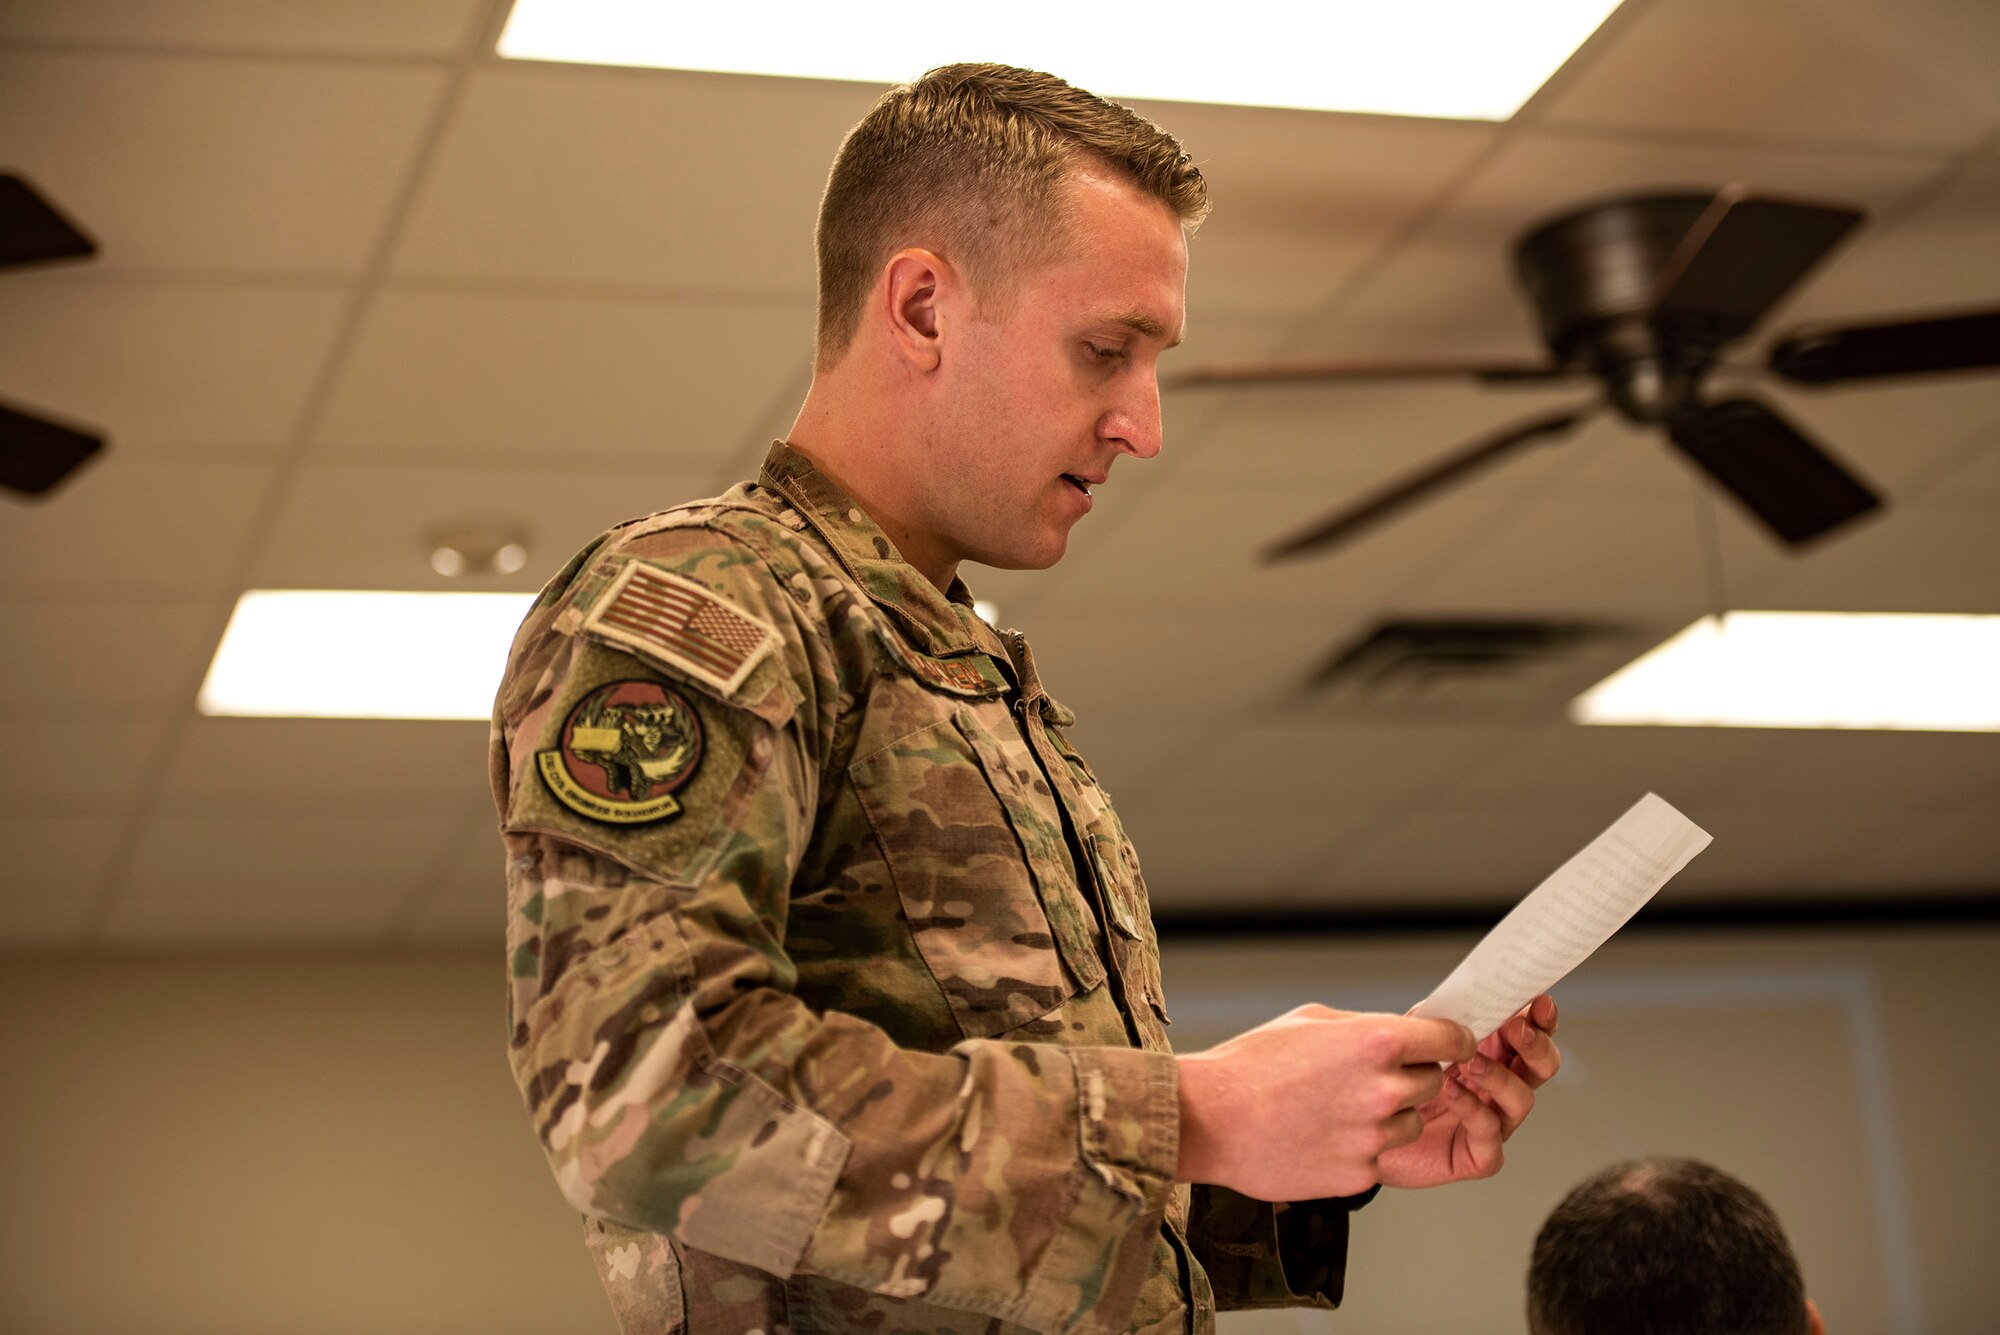 Senior Airman Matthew McCracken, 23d Civil Engineer Squadron explosive ordnance disposal apprentice, reads a scenario during resiliency training Sept. 10, 2019, at Moody Air Force Base, Ga. The event was hosted by the 23d Wing chaplain, and served as an interactive experience for Airmen, providing practical approaches they can use regularly to improve the resiliency culture in their squadrons. (U.S. Air Force photo by Senior Airman Erick Requadt)